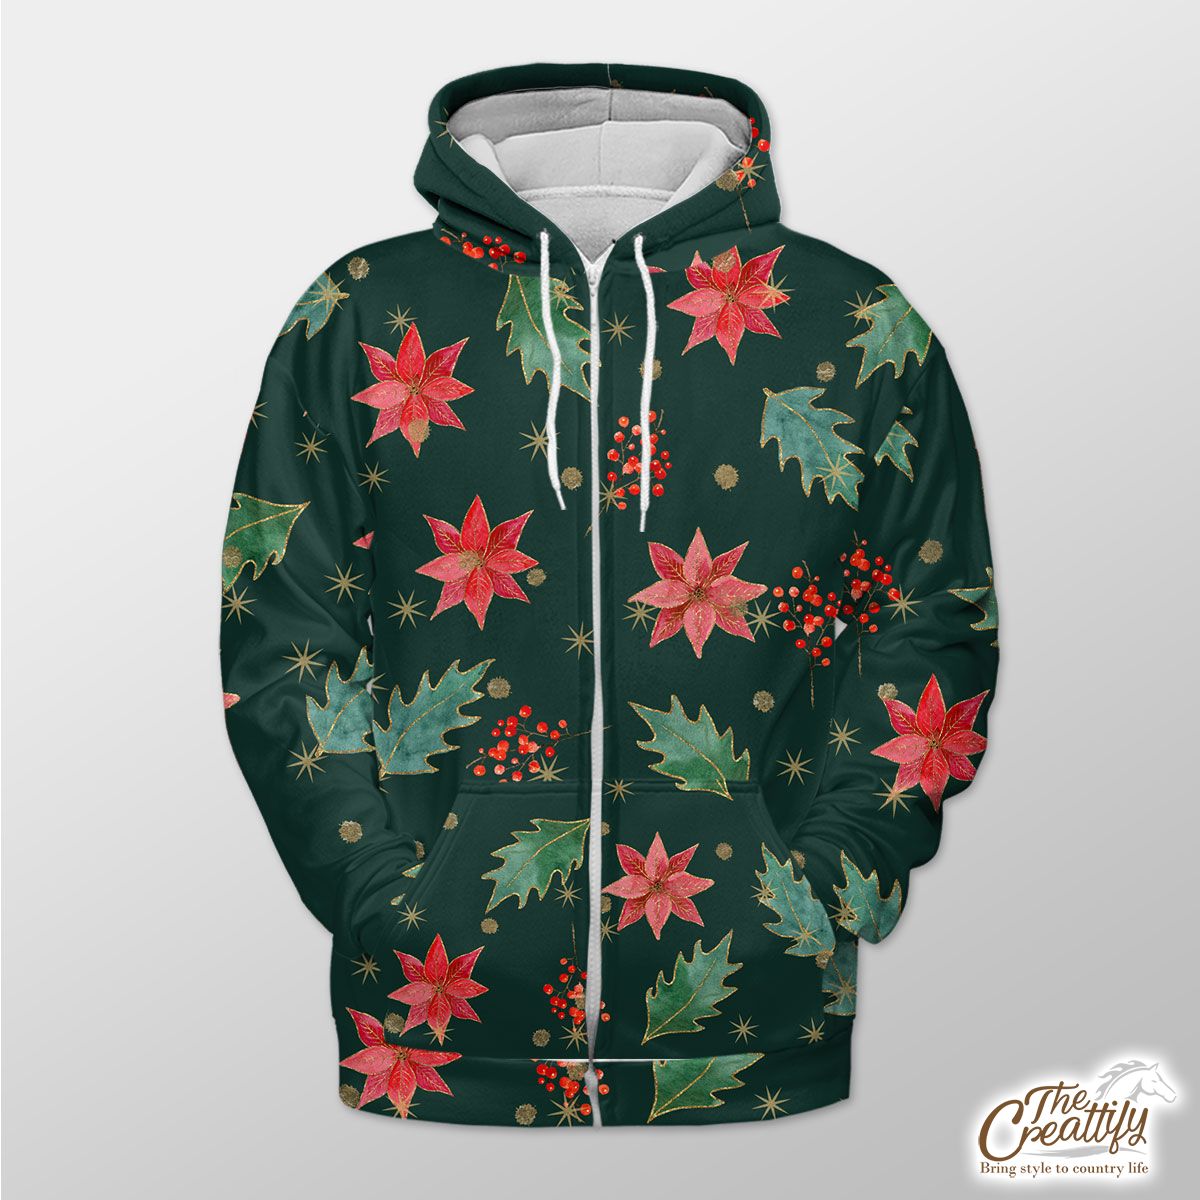 Poinsettias For Christmas And Holly Leaf Pattern Zip Hoodie